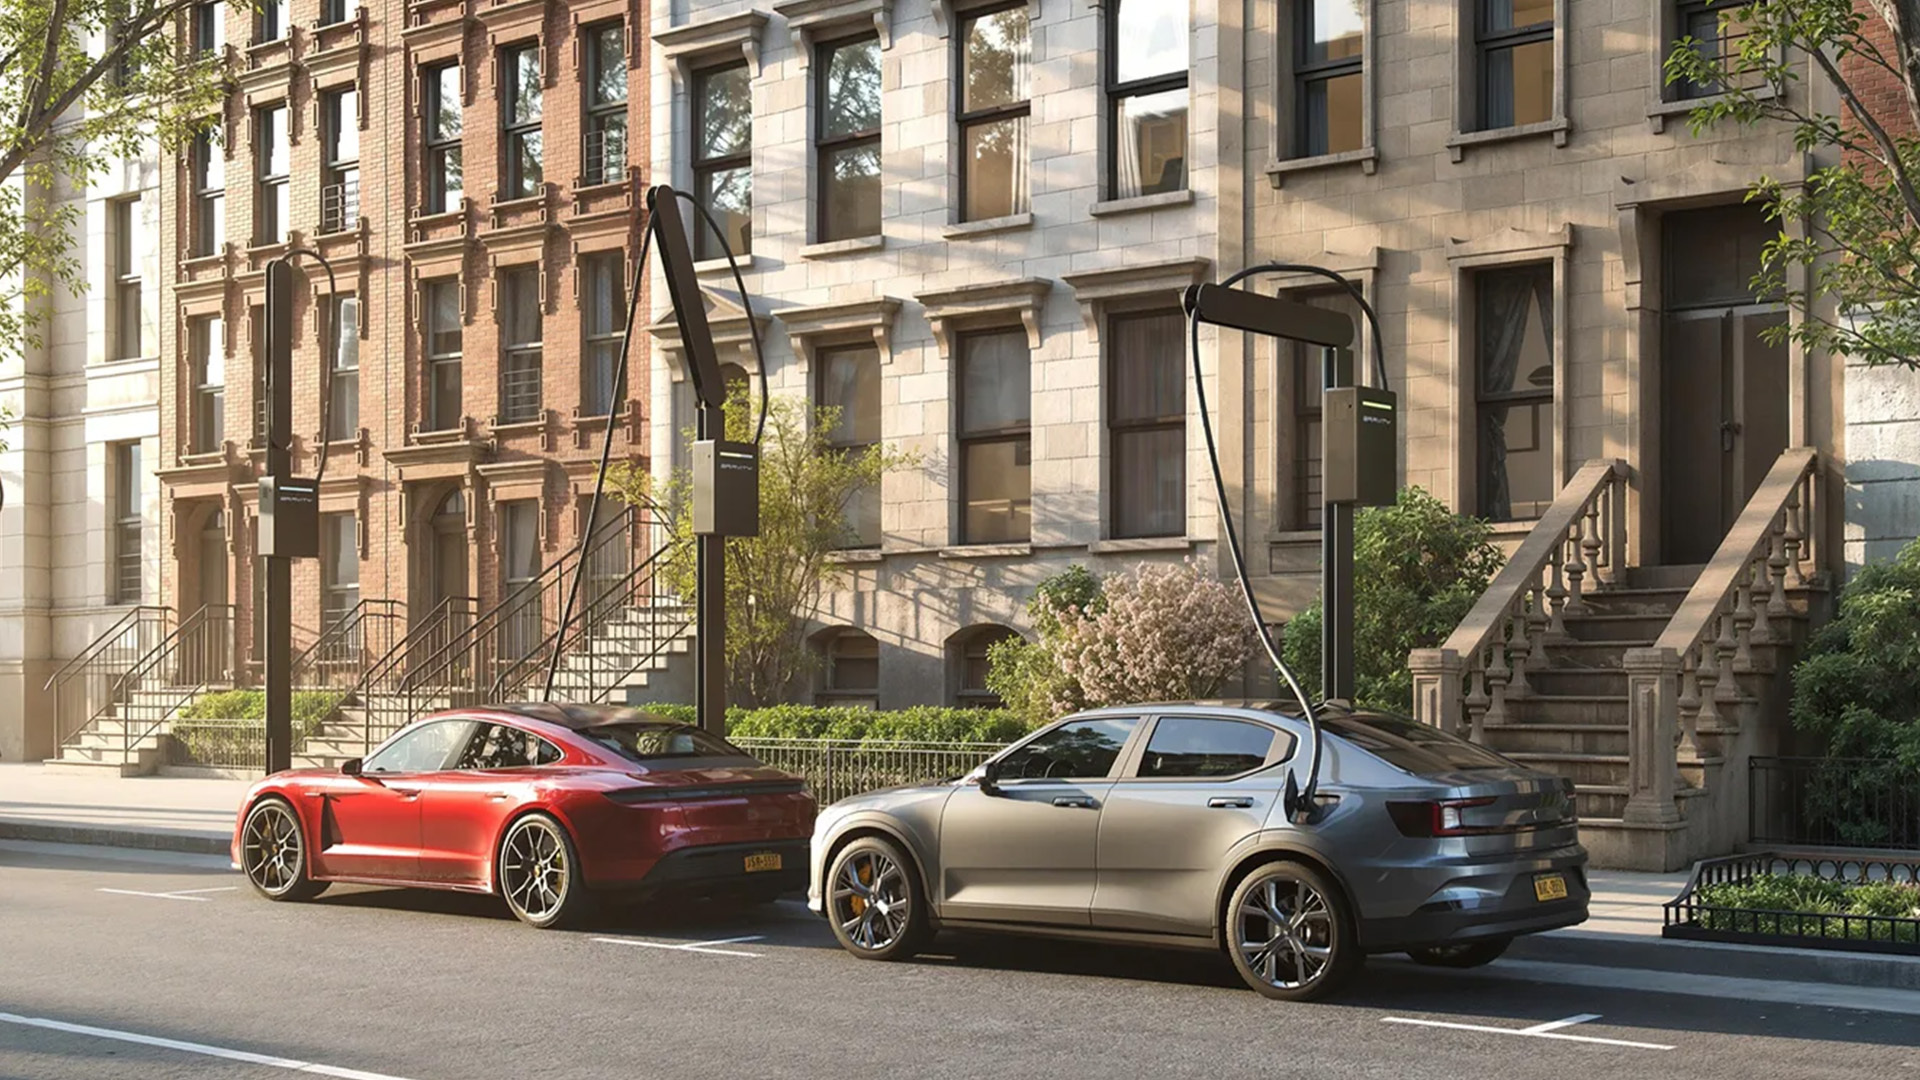 EV infrastructure startup Gravity Inc. is bringing ultra-fast electric vehicle charging "trees" to New York City.